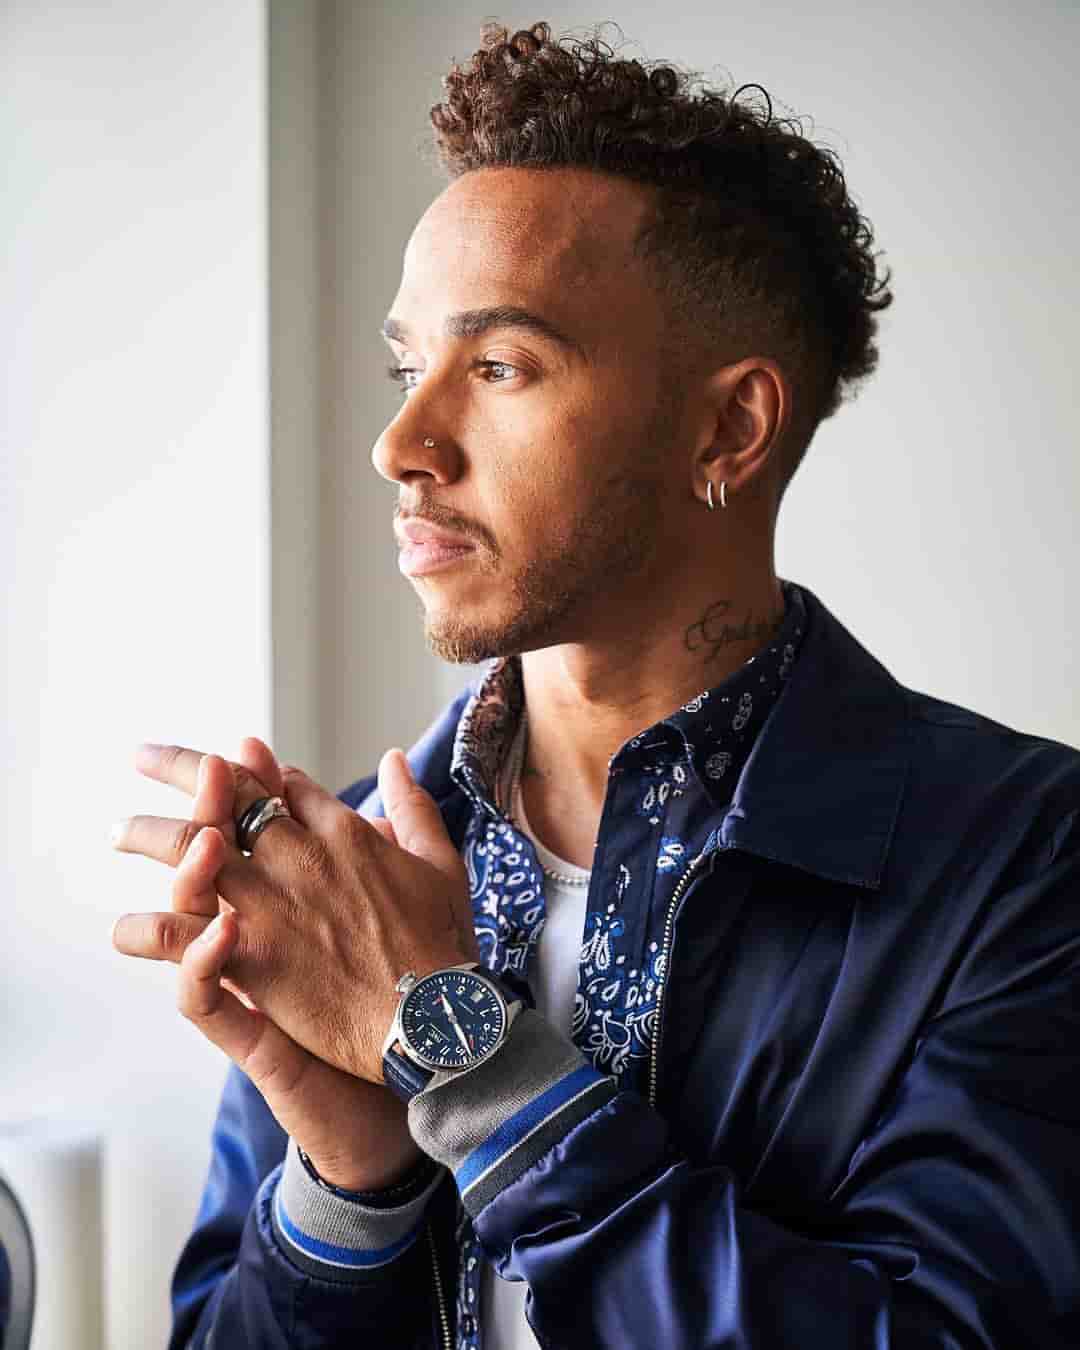 Lewis Hamilton’s Net Worth: How He Makes and Spends His Fortune